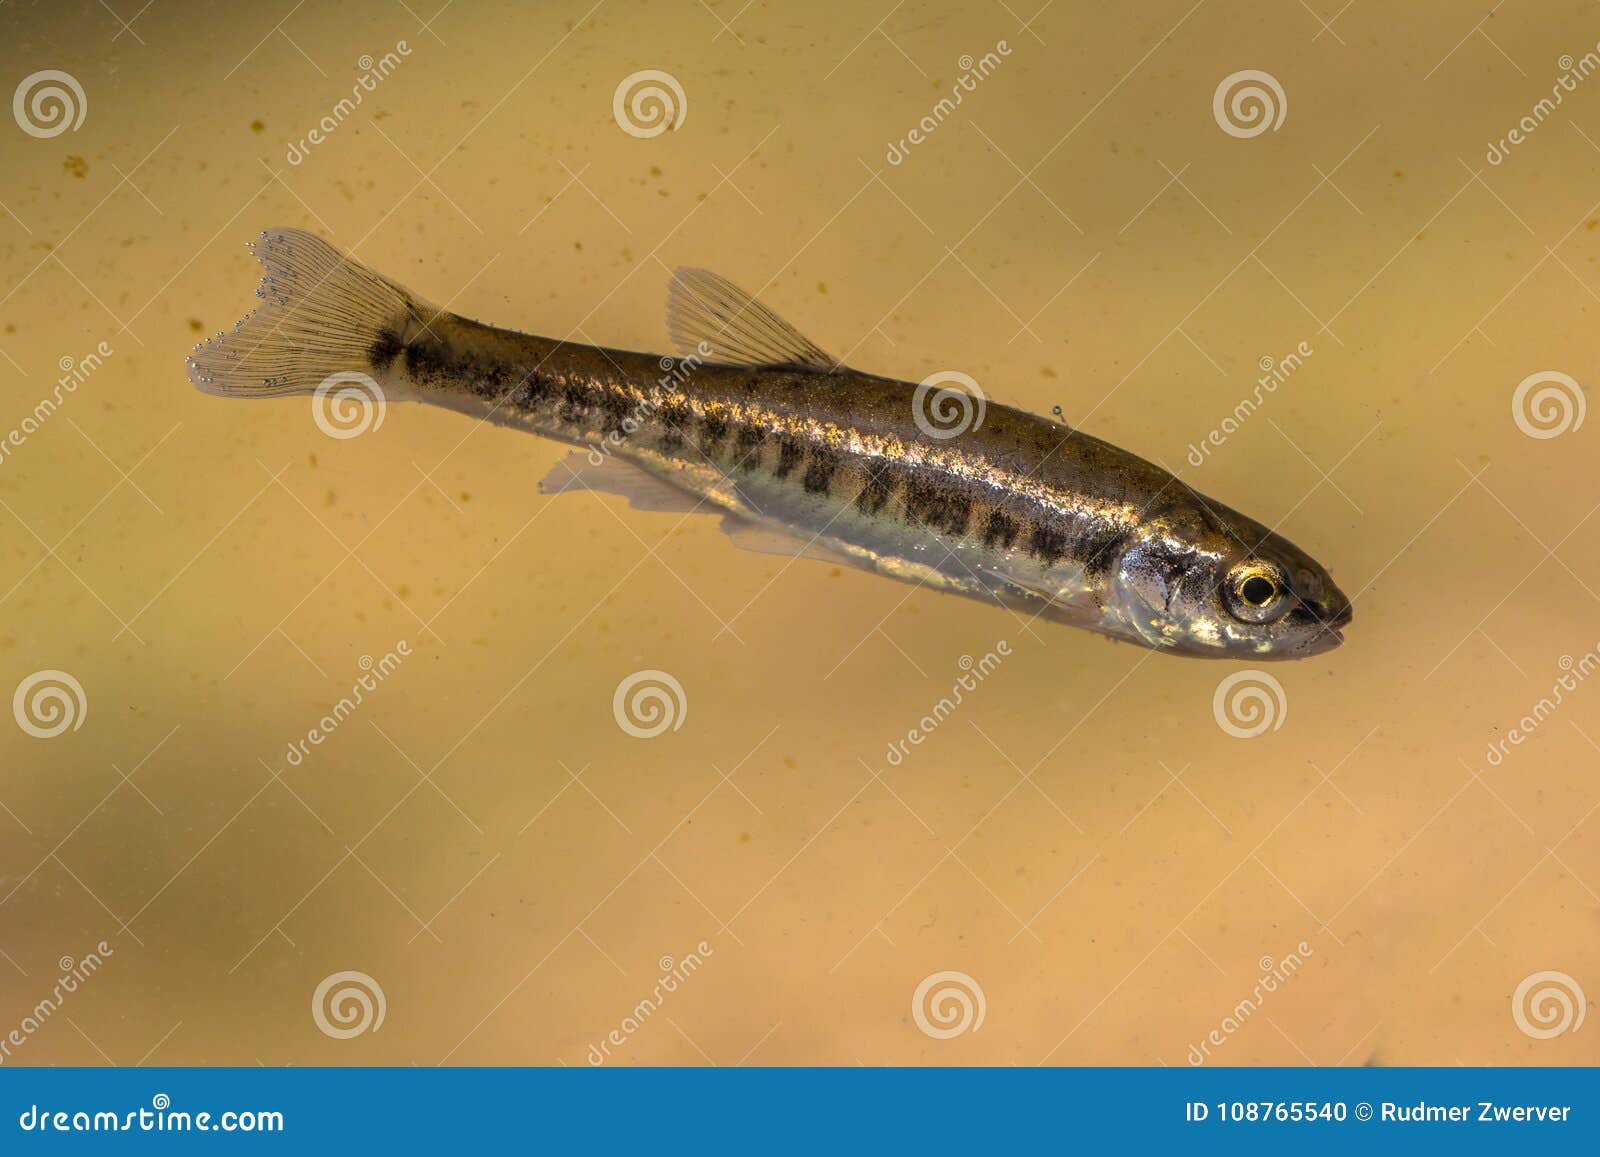 Eurasian Minnow Swimming in Water of River Stock Photo - Image of